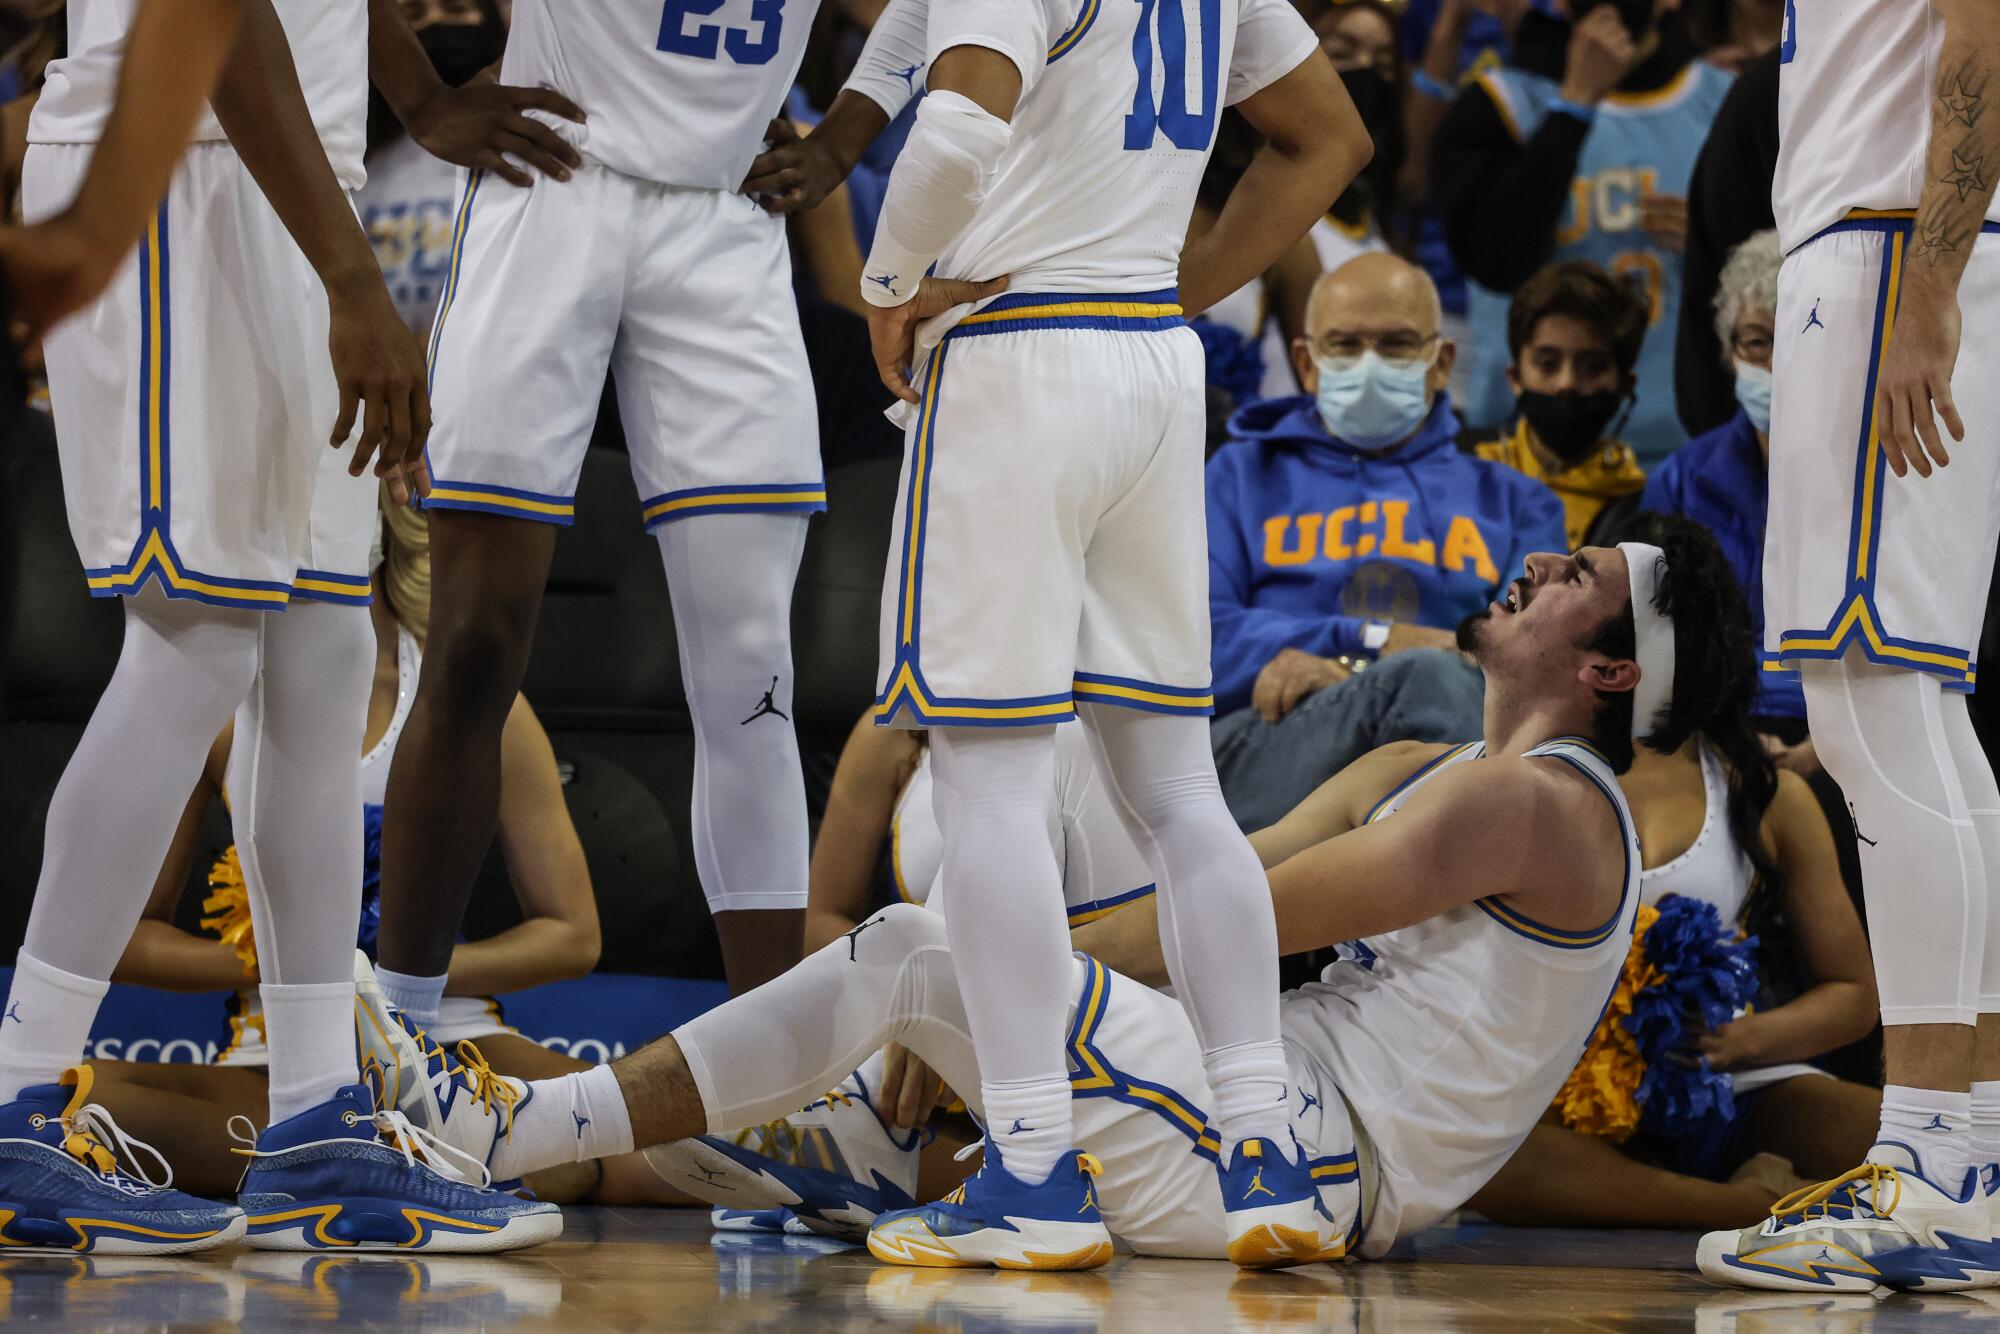 UCLA guard Jaime Jaquez Jr. writhes in pain after suffering an apparent ankle injury 